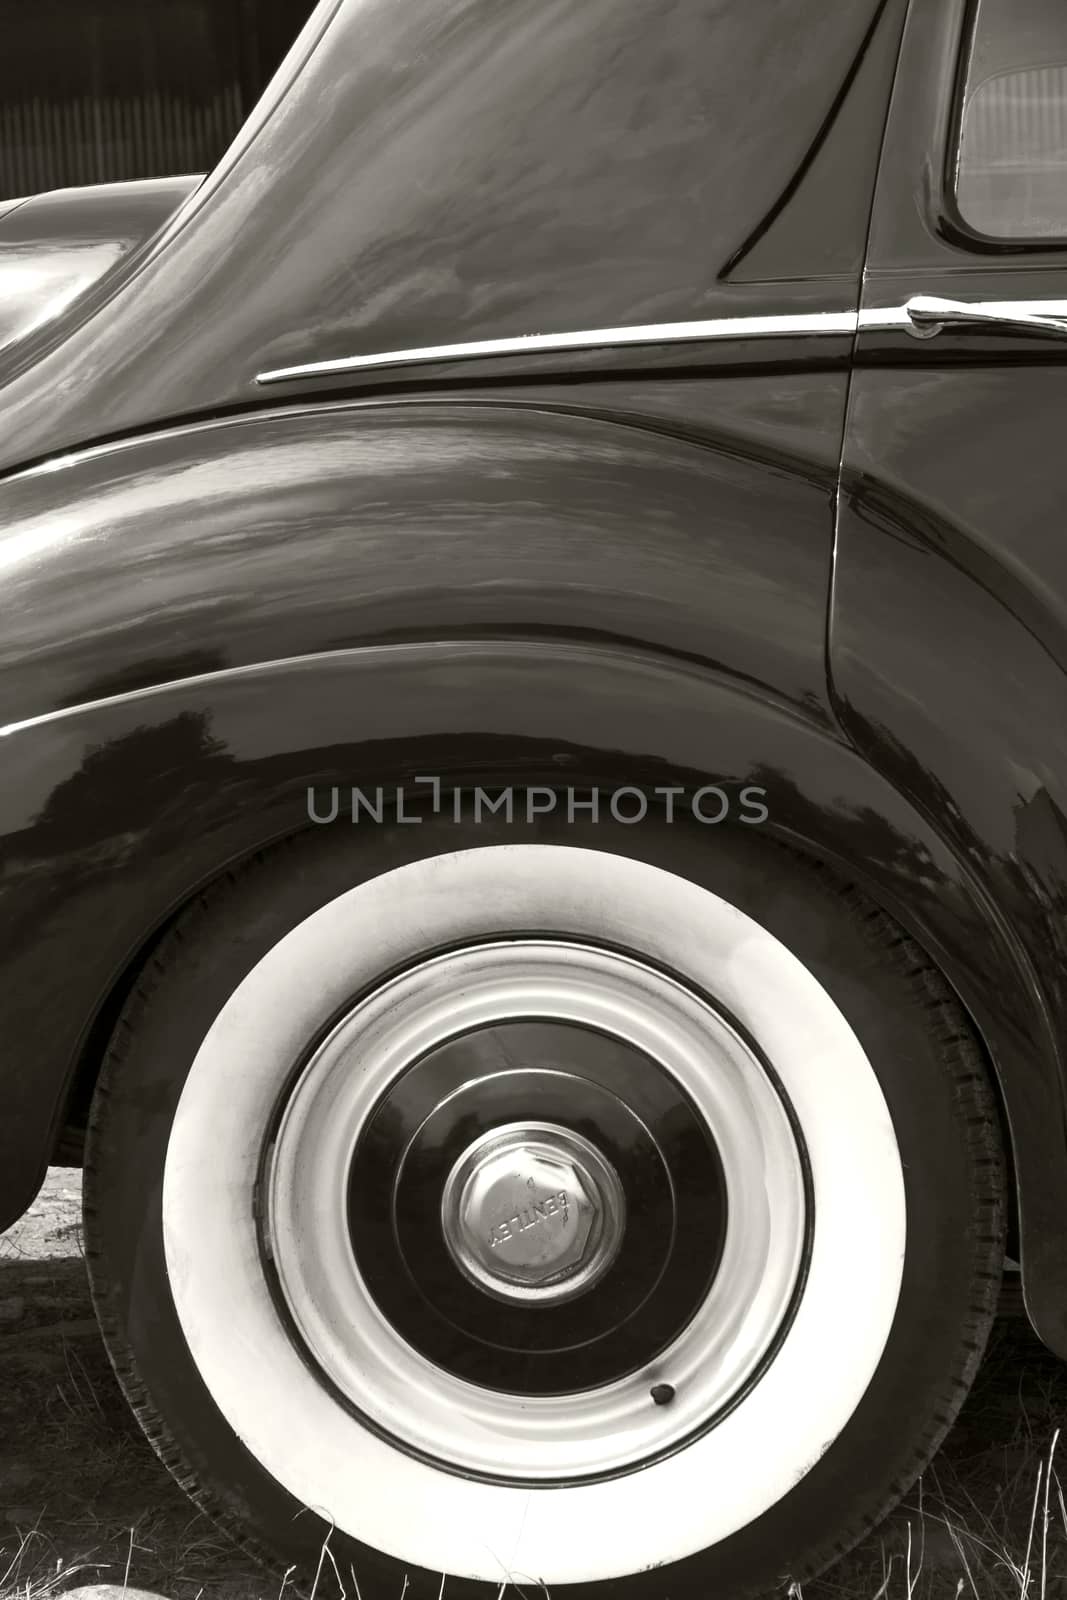 The rear and the rear wheel of a vintage car in black and white.